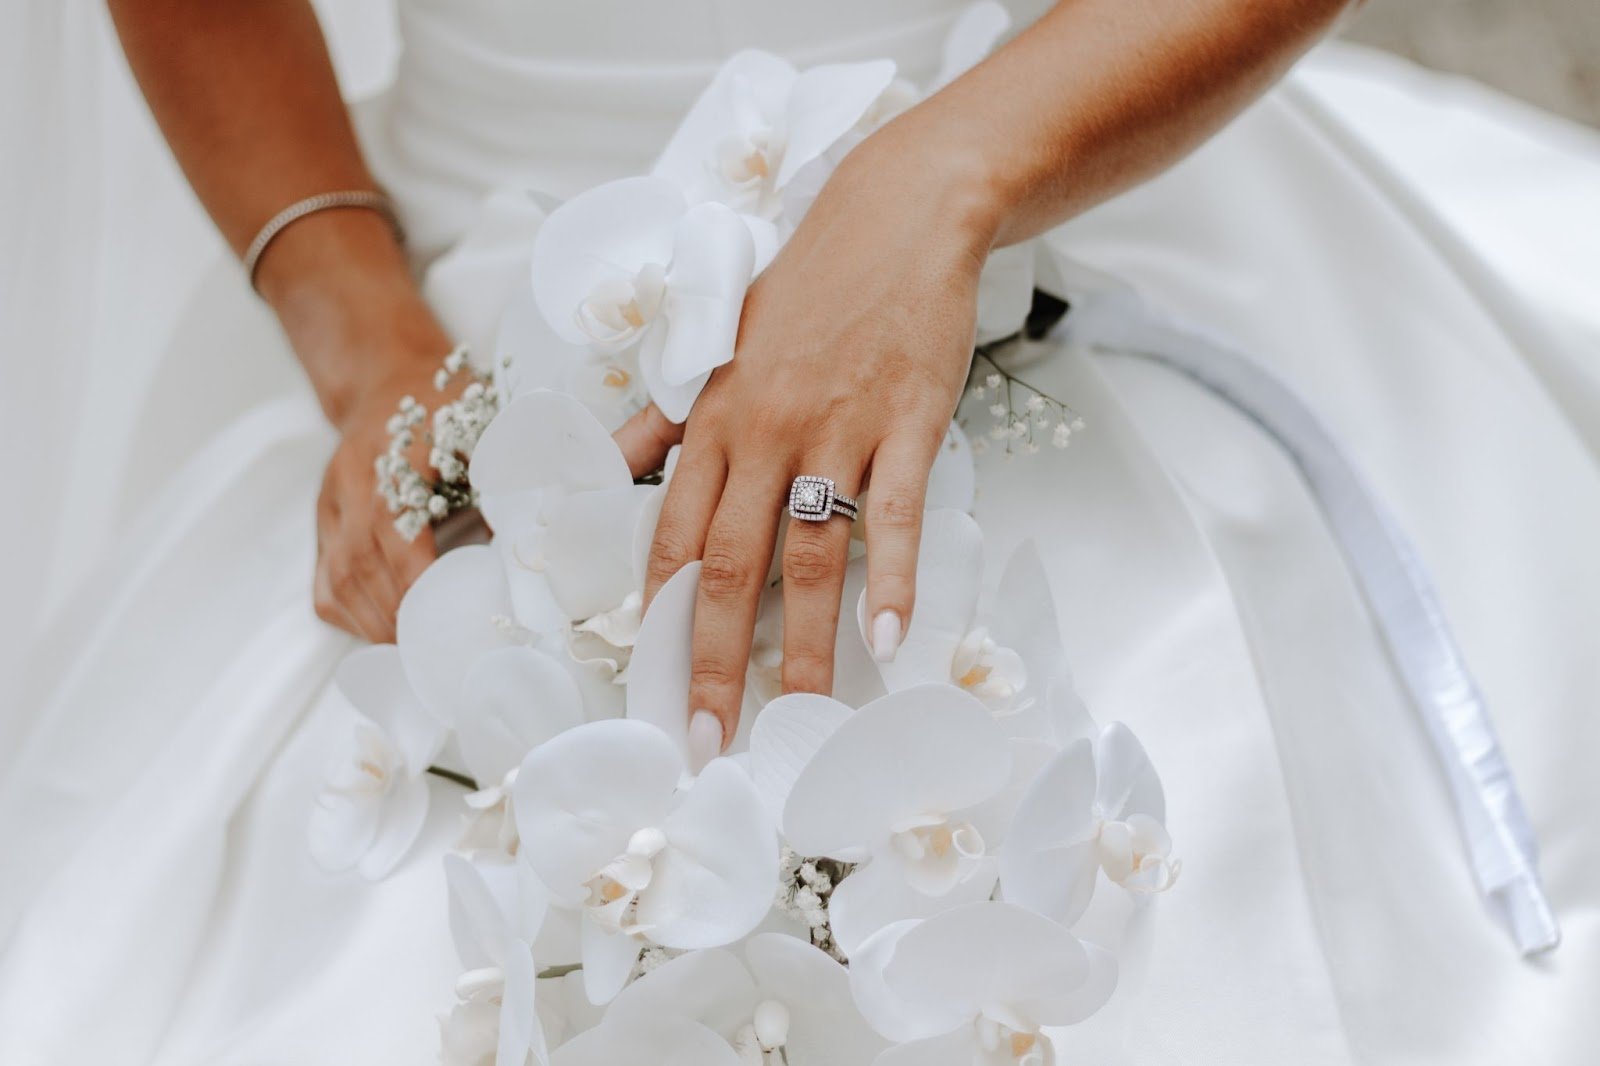 The Engagement Ring vs Wedding Ring: What's the Difference?